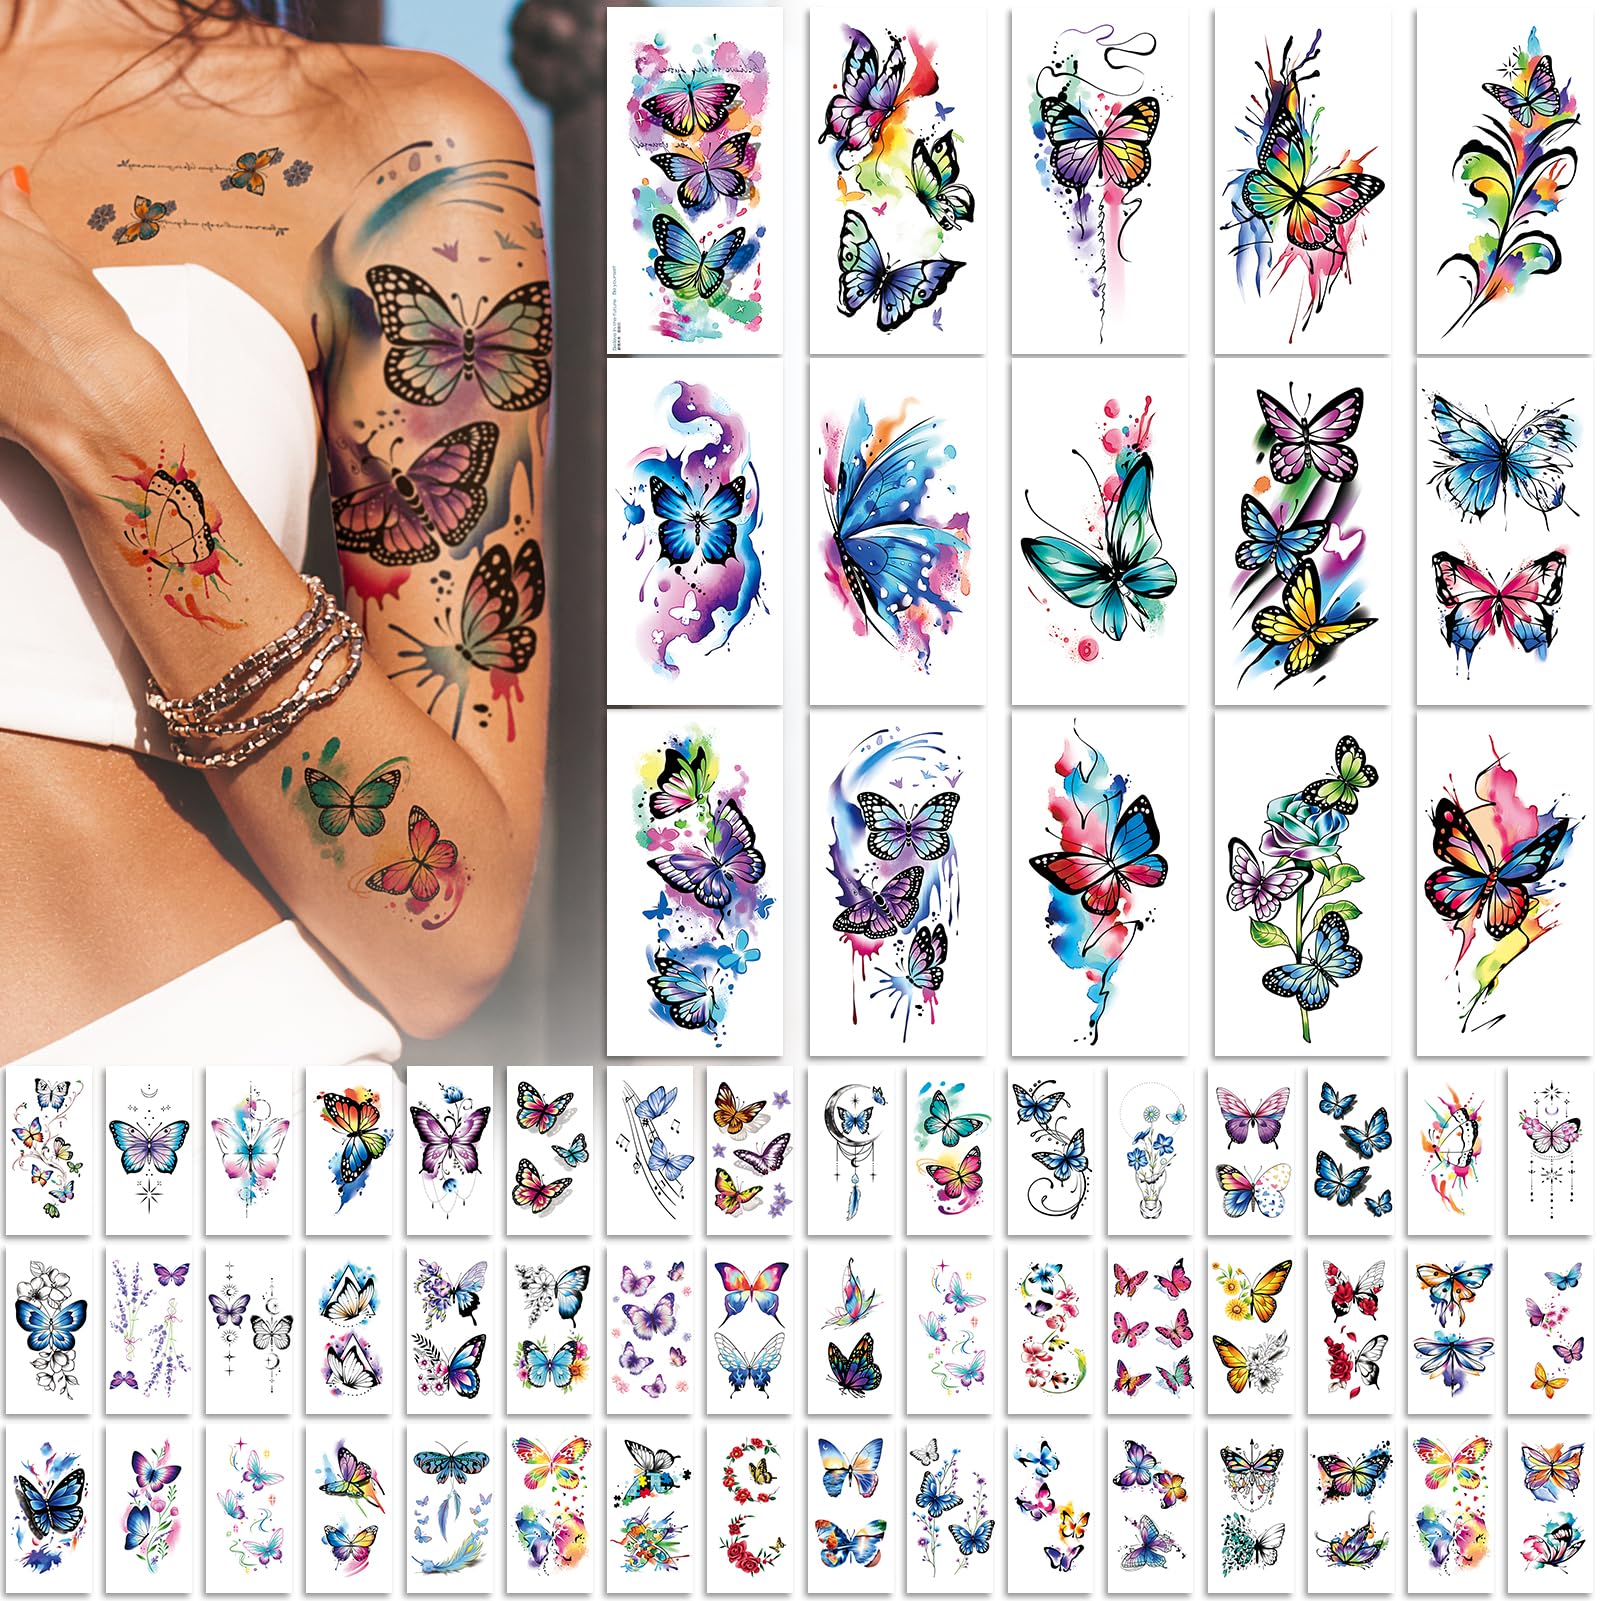 

79 Pcs Butterfly Temporary Tattoos For Women Girls, Realistic Colorful Sleeve Tattoos Stickers, Waterproof Long Lasting Temporary Tattoos For Face Arm Leg Body